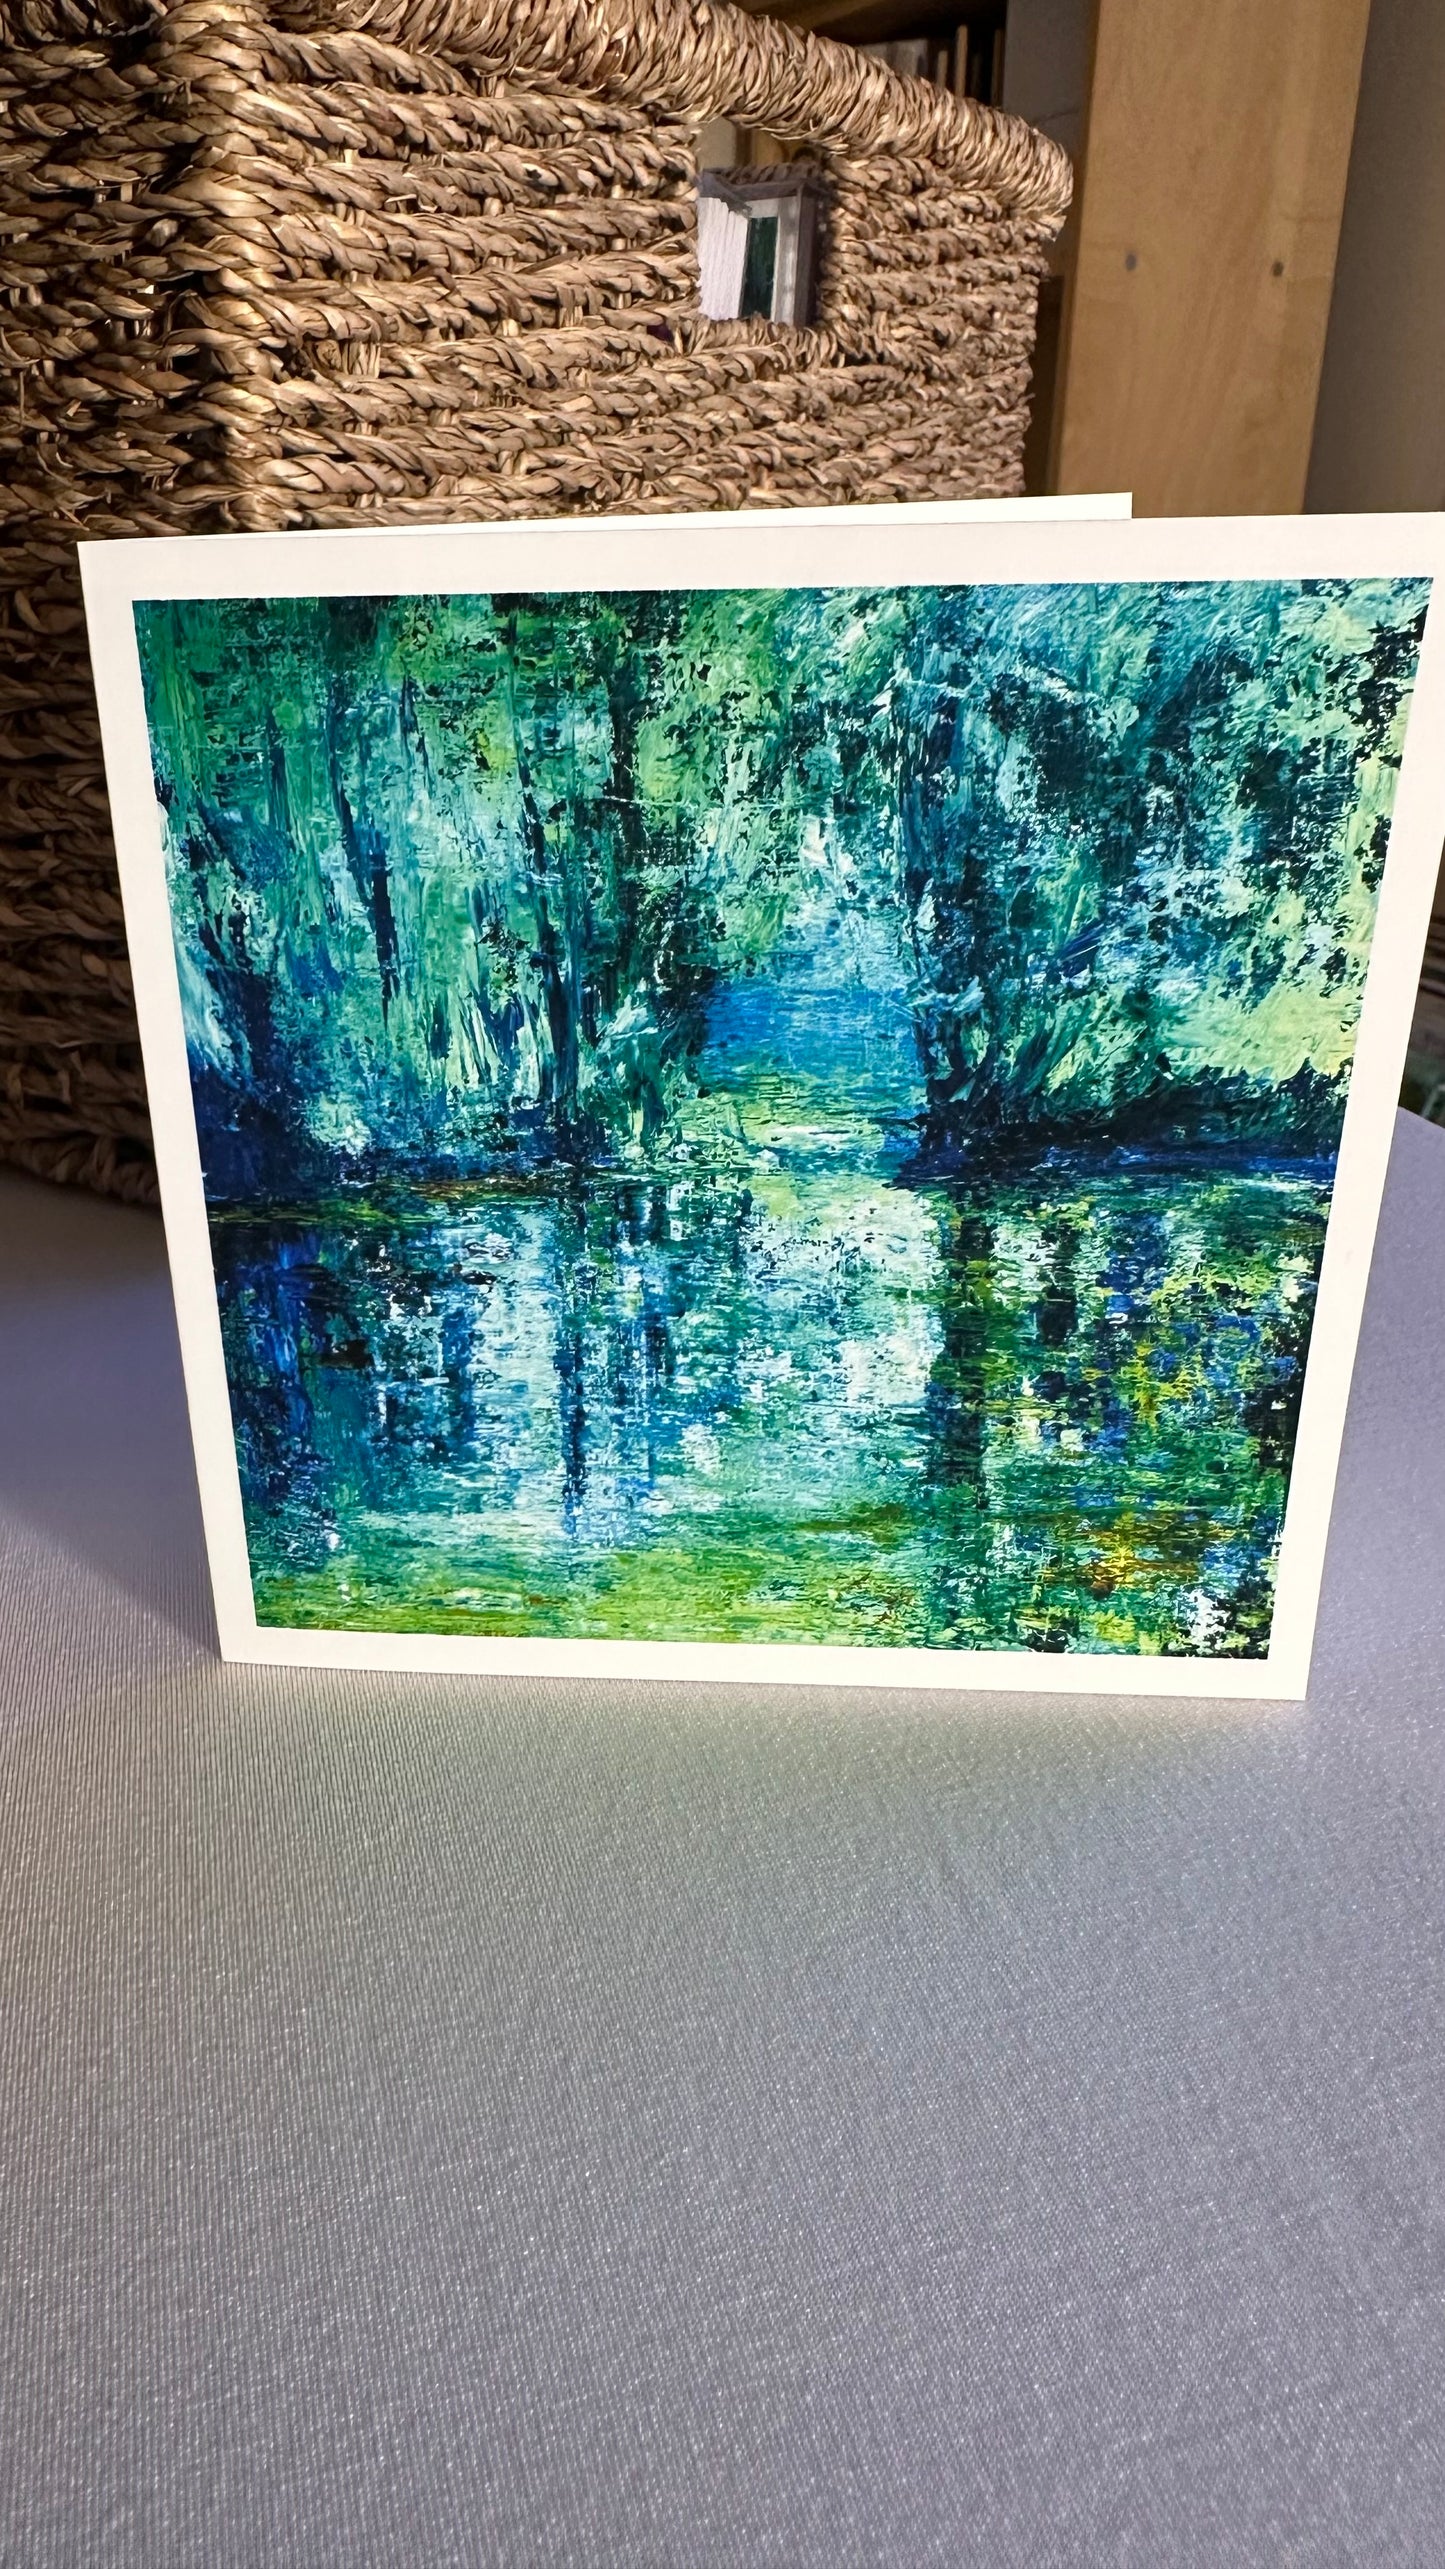 The Impressionist 2 Collection: Set of 7 Square Greeting Cards with 7 Different Impressionist Designs